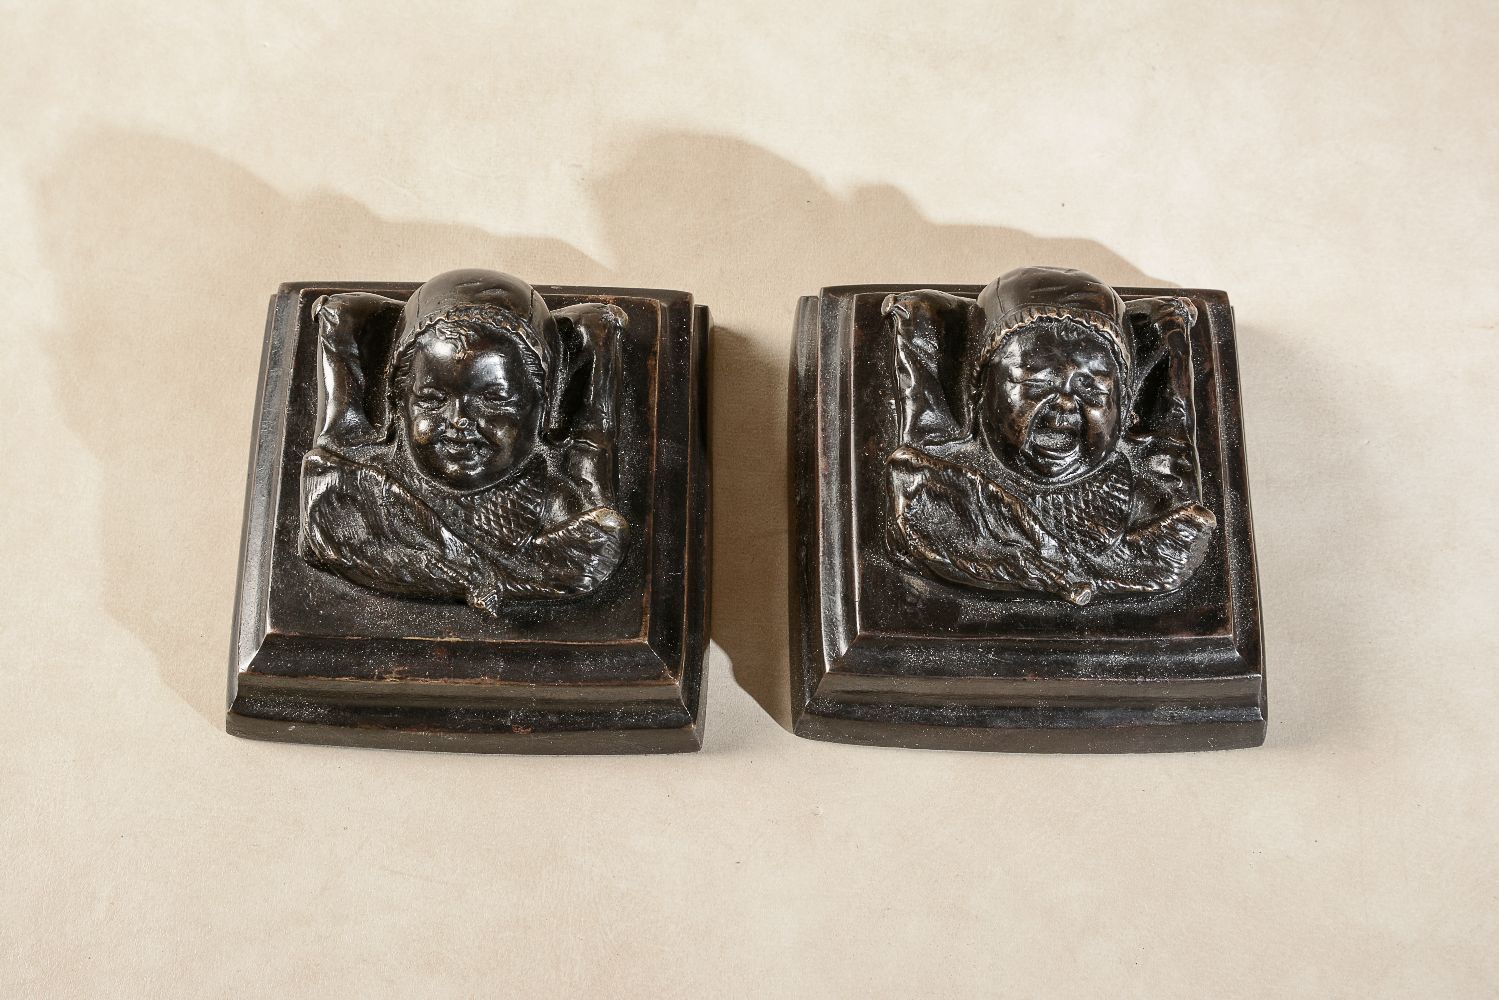 A pair of patinated bronze reliefs cast as infants' heads - Image 2 of 2